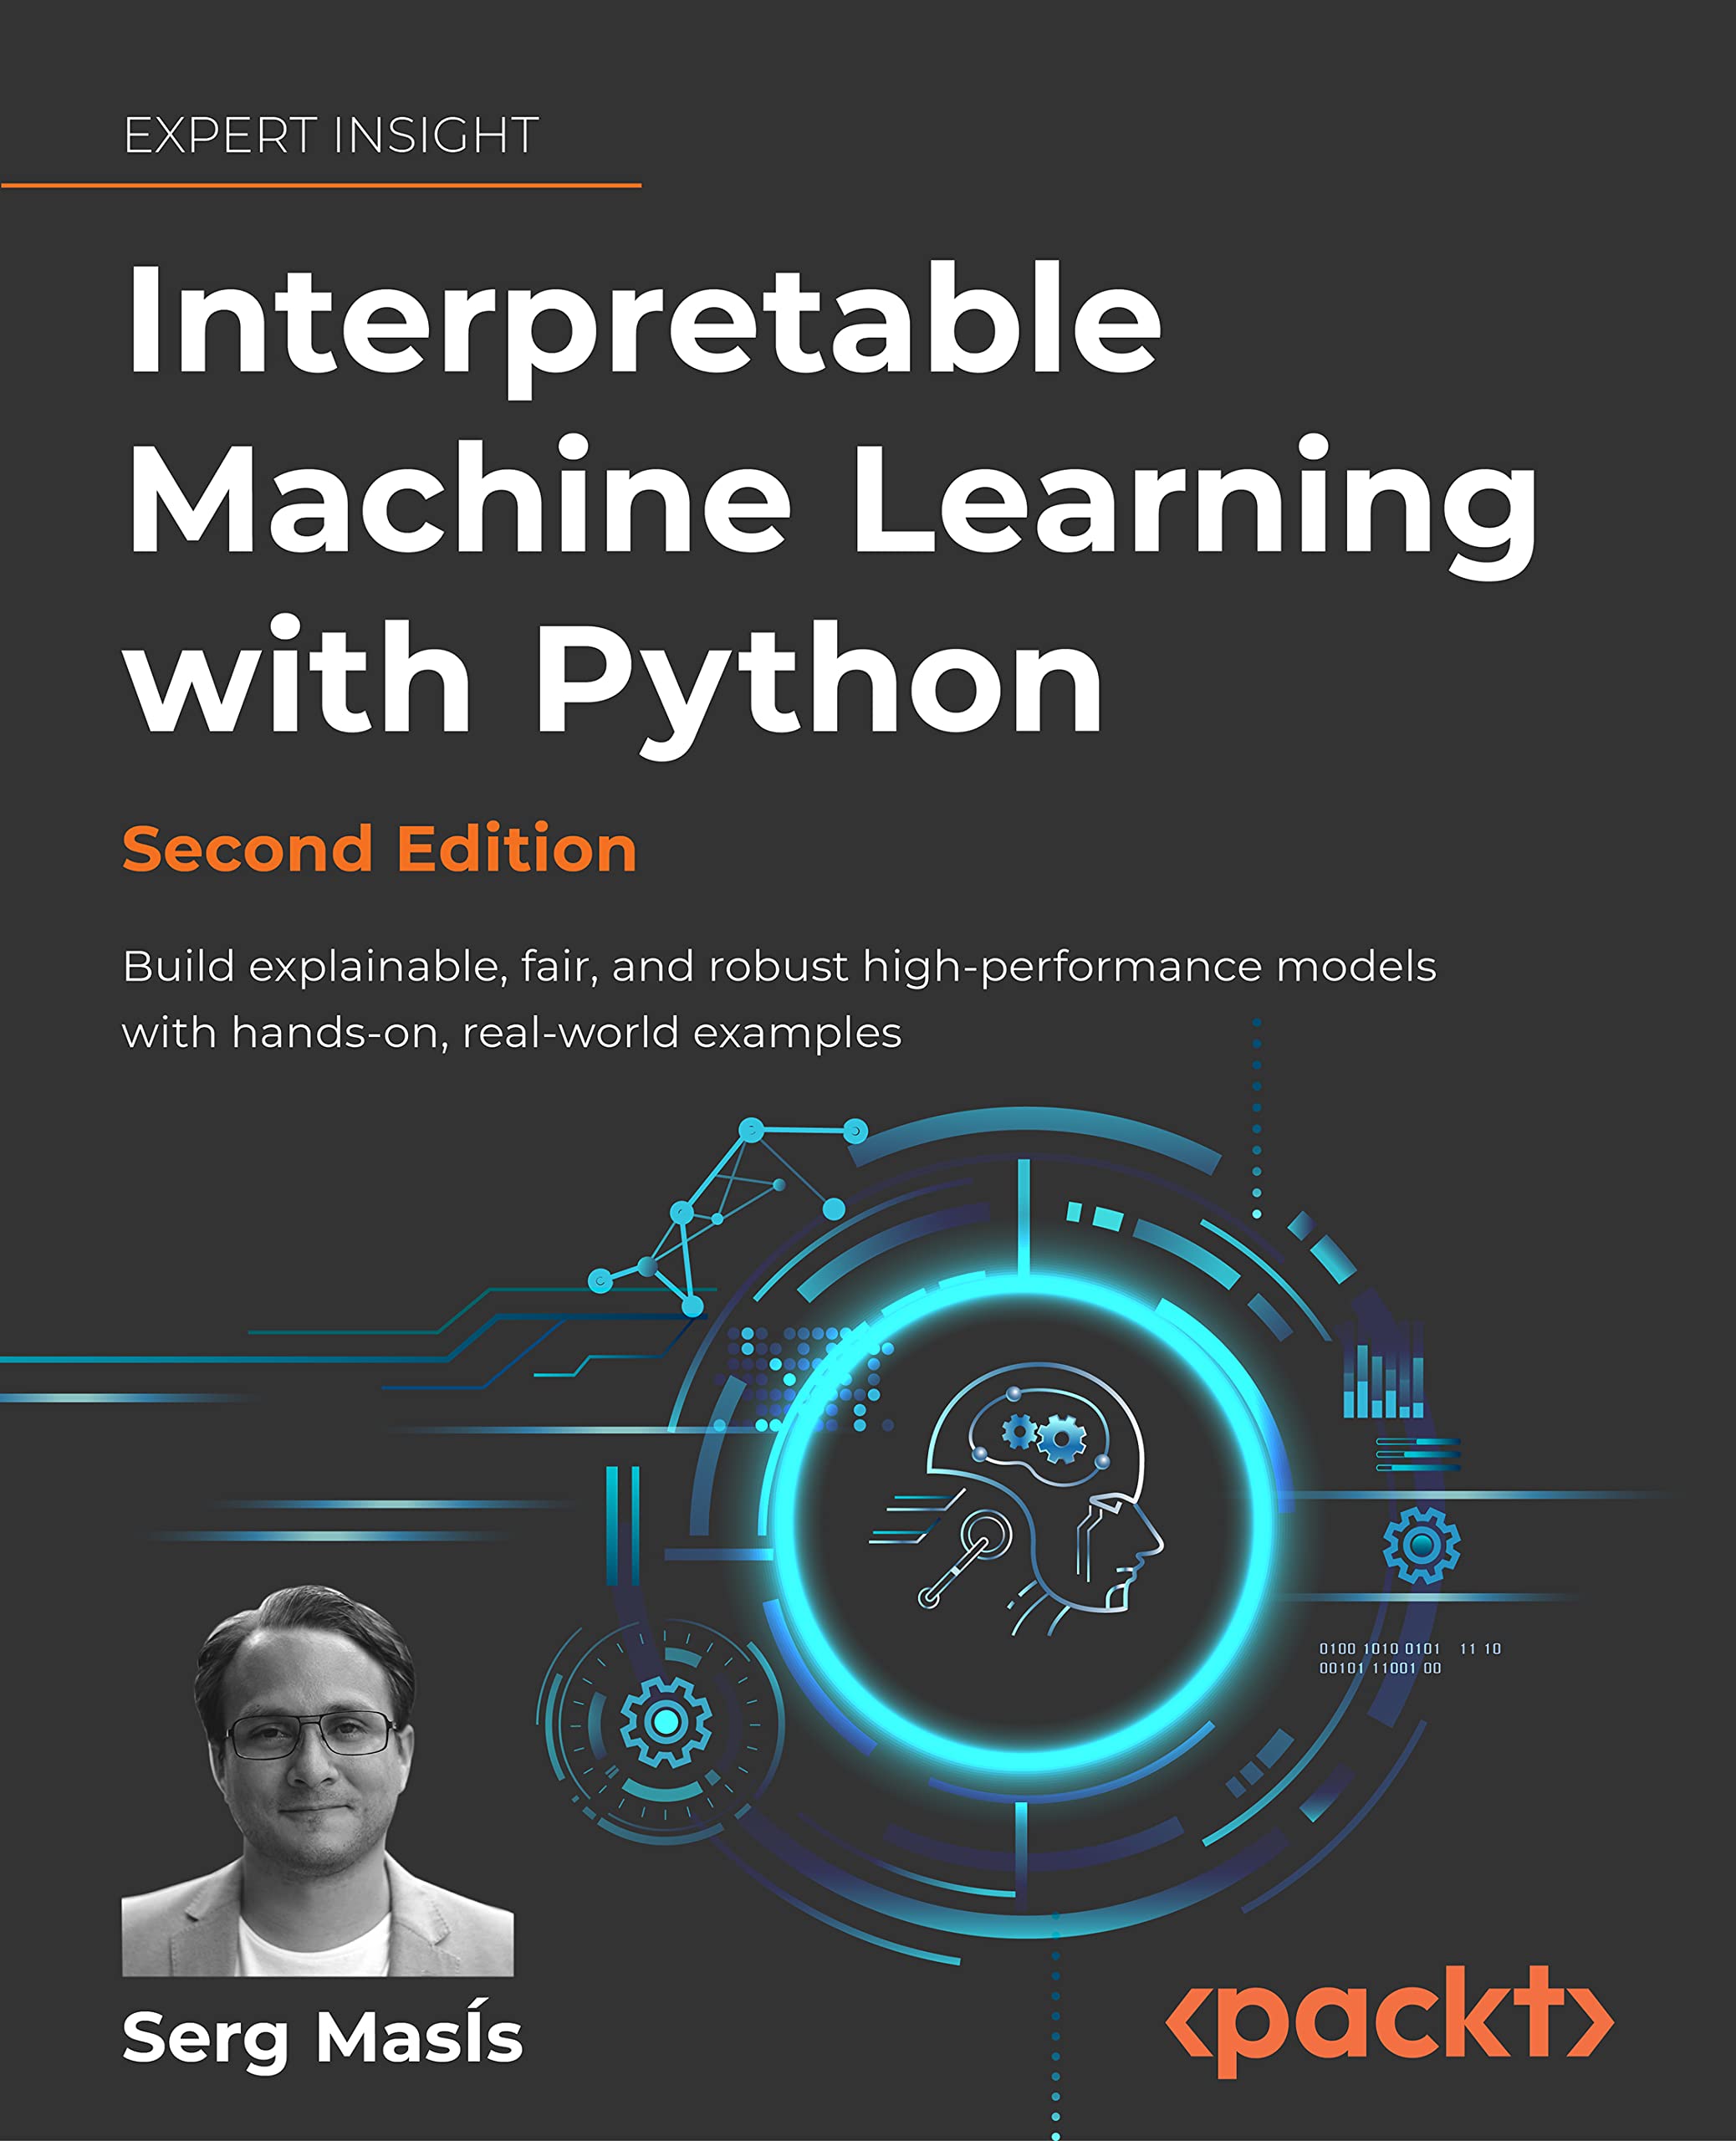 Interpretable Machine Learning with Python: Build explainable, fair, and robust high-performance models with hands-on, real-world examples, 2nd Edition